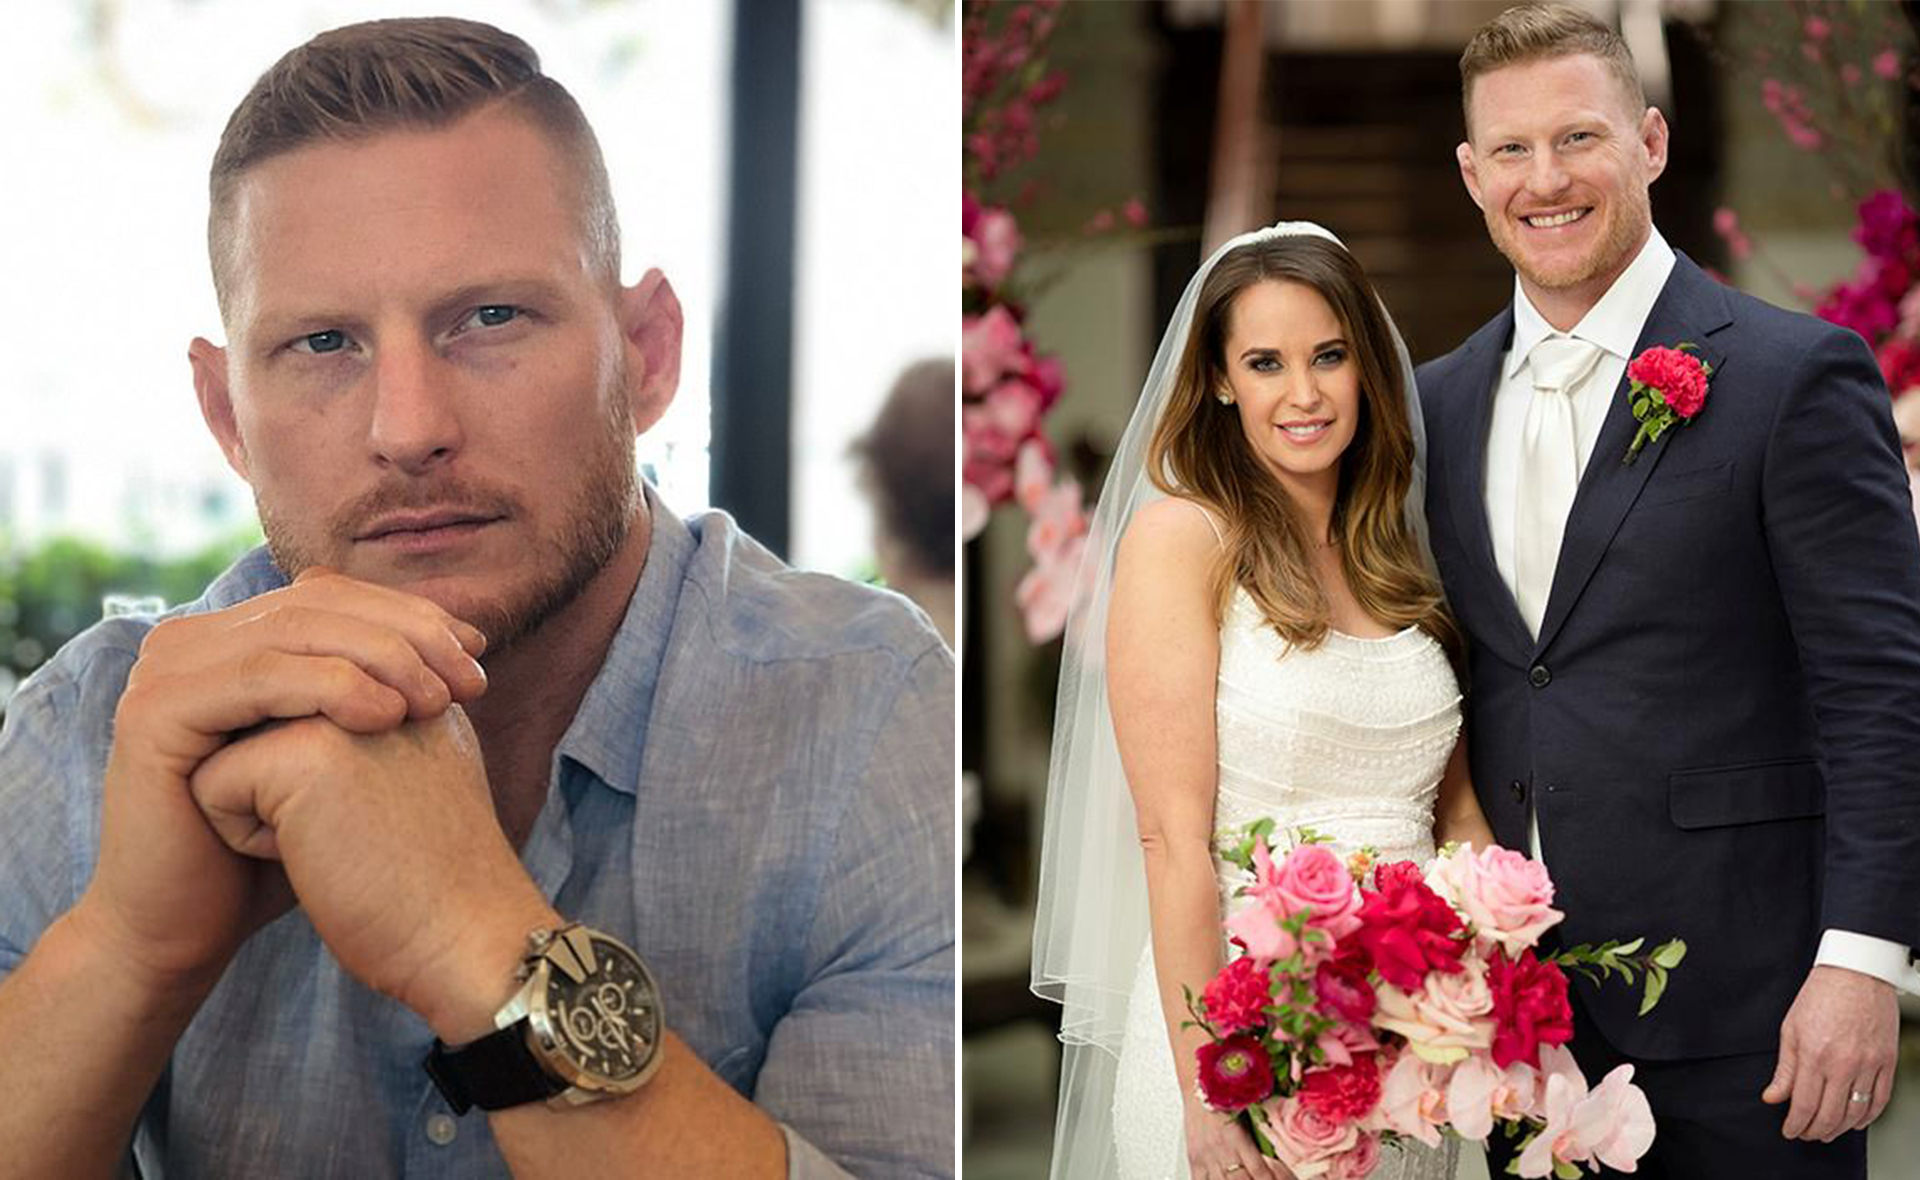 A failed engagement, one divorce and a three-year-old daughter: The truth behind MAFS star Andrew’s past relationships and family life